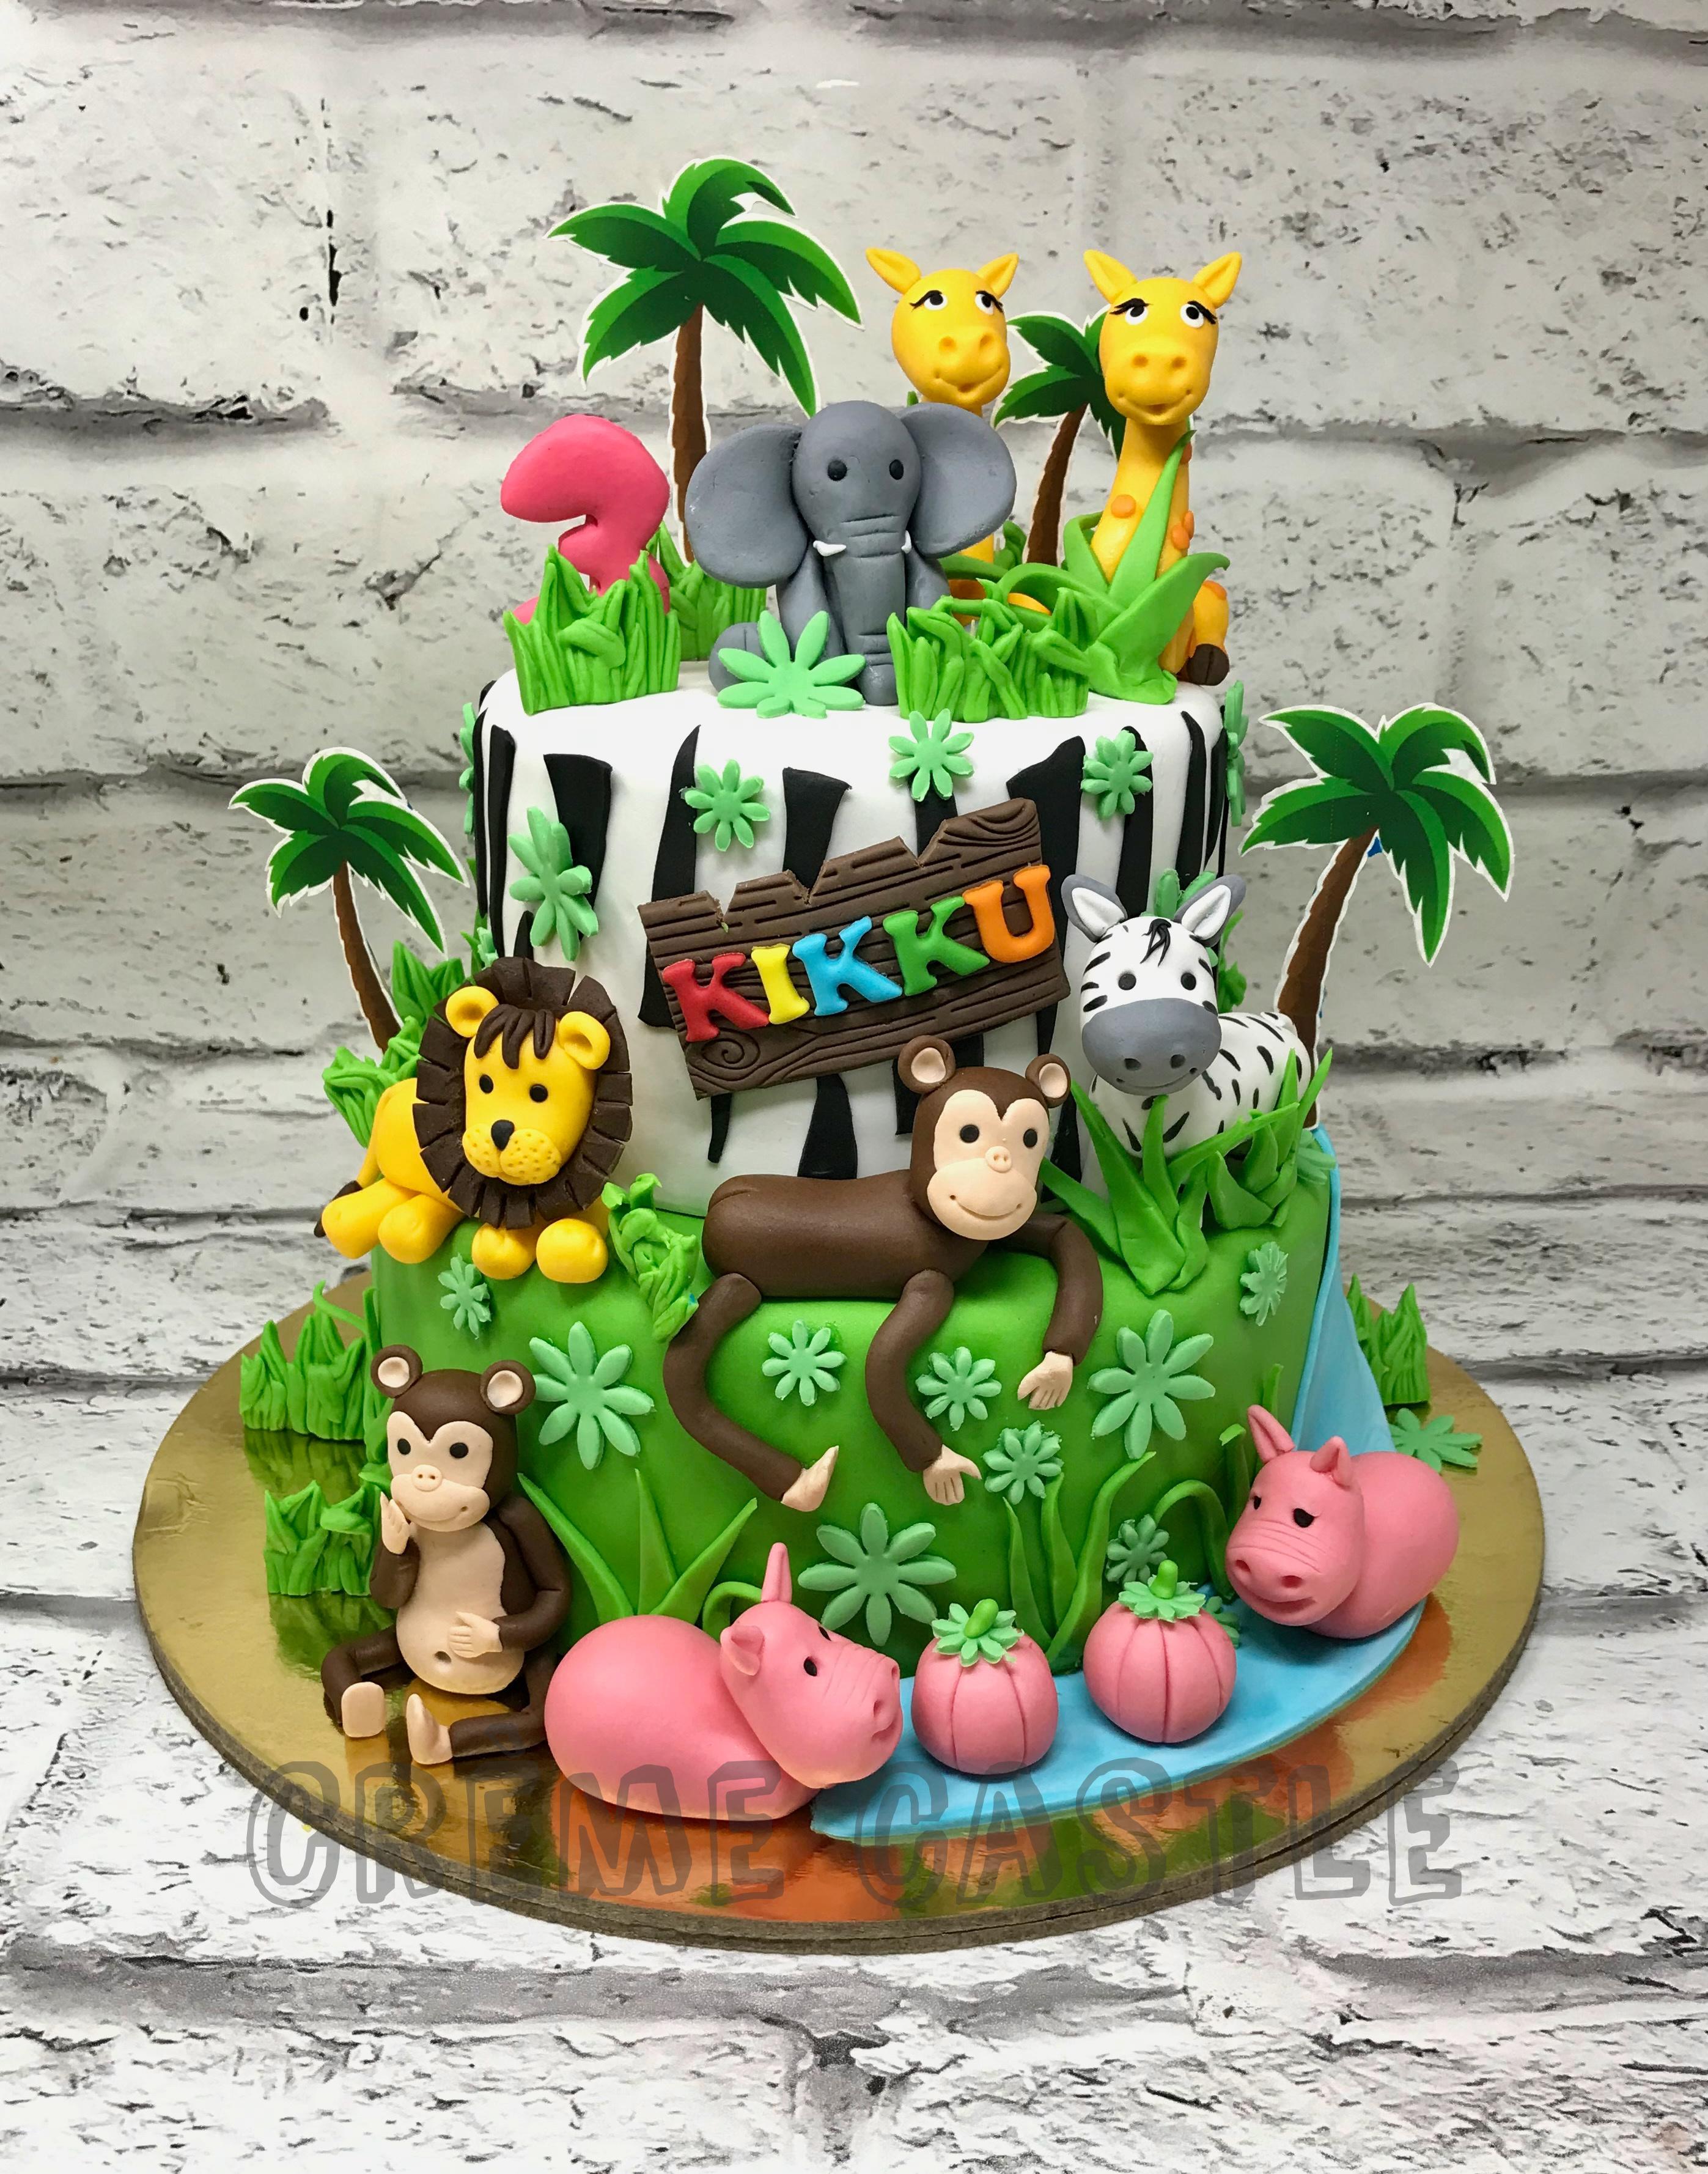 Animals & Forest Theme Cake 2 | Just Cakes